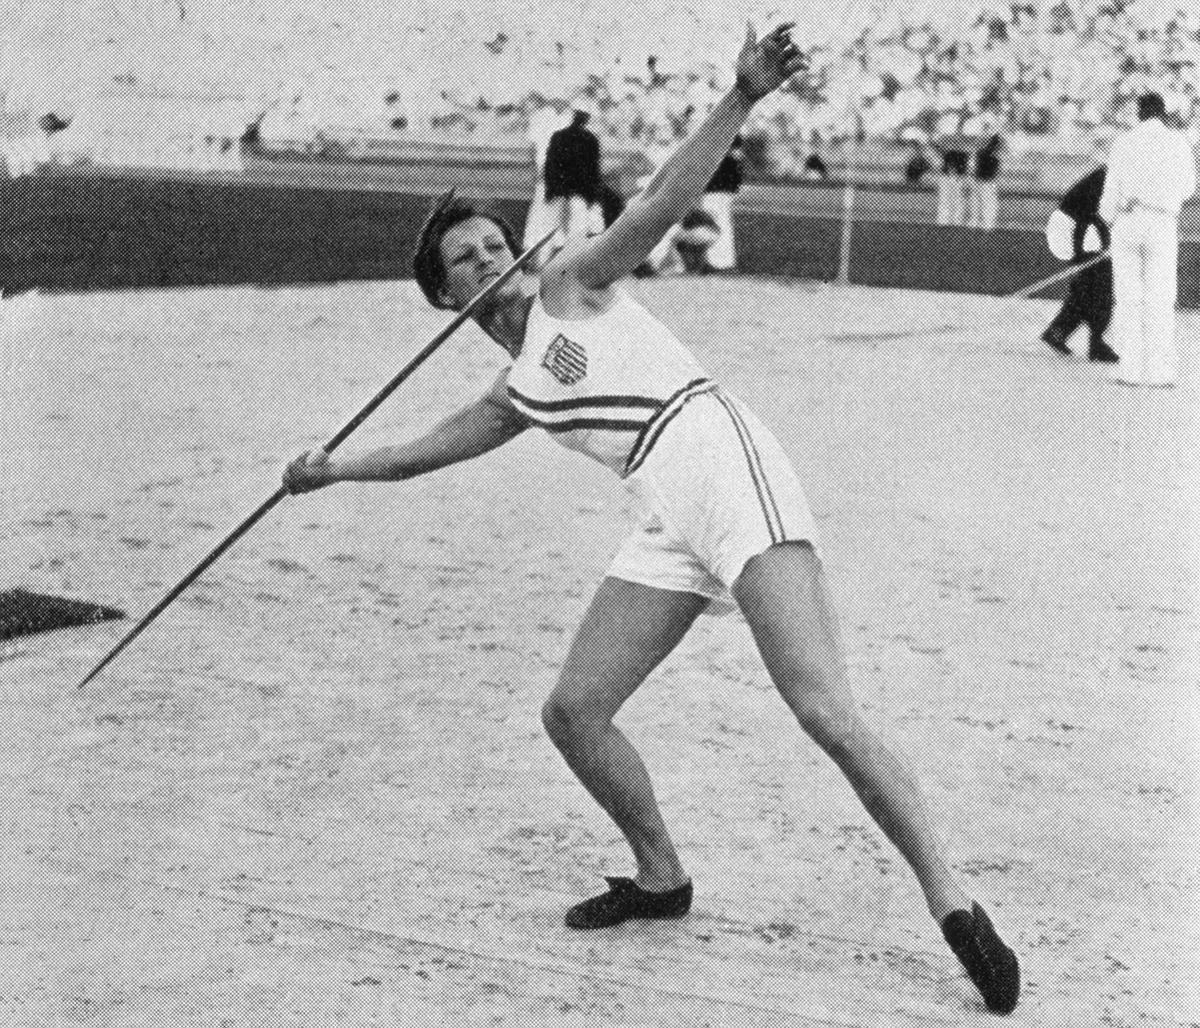 Babe Didrikson winning the gold medal at the 1932 Summer Olympic Games in Los Angeles for the Women's Track and Field javelin event. (Getty Images)